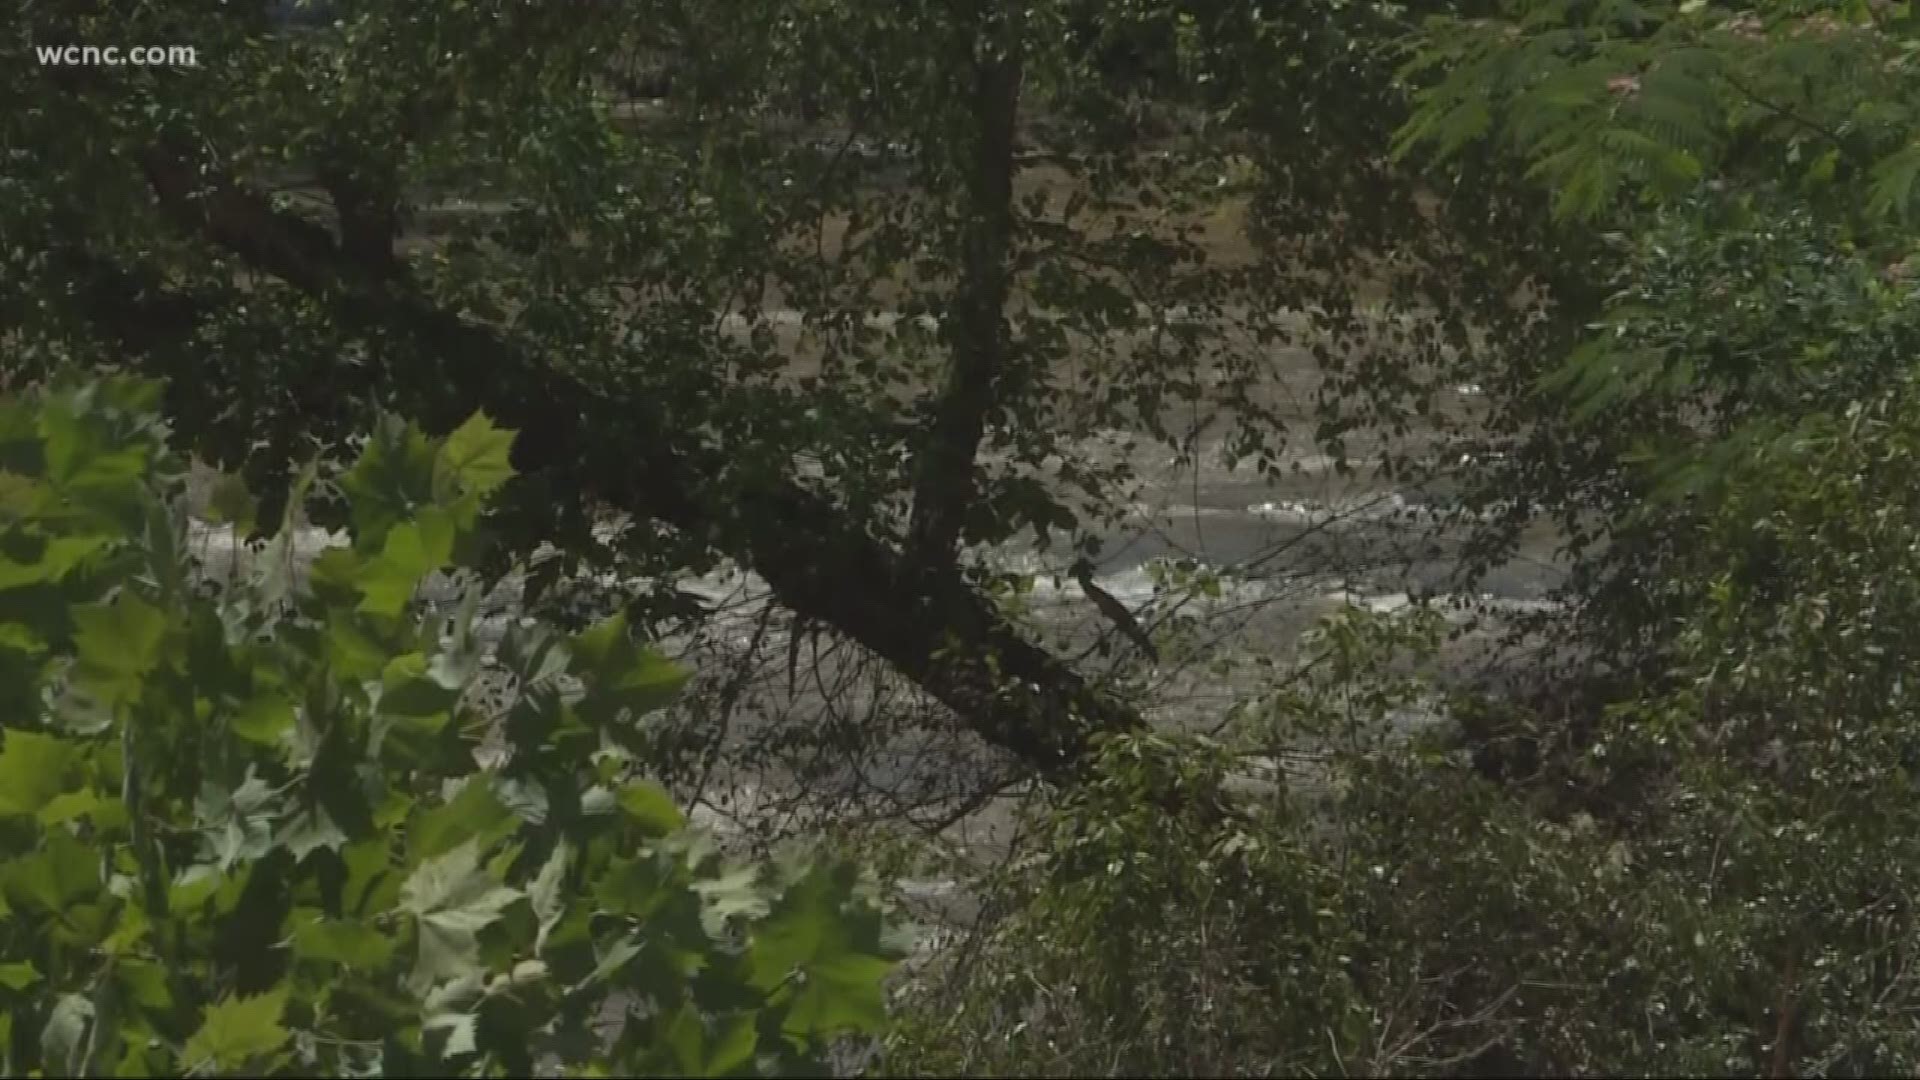 In just the past two weeks, two teenagers have drowned while swimming in the river. A 14-year old boy died back on June 11th. Tuesday, rescuers recovered the body of a 16-year-old girl.